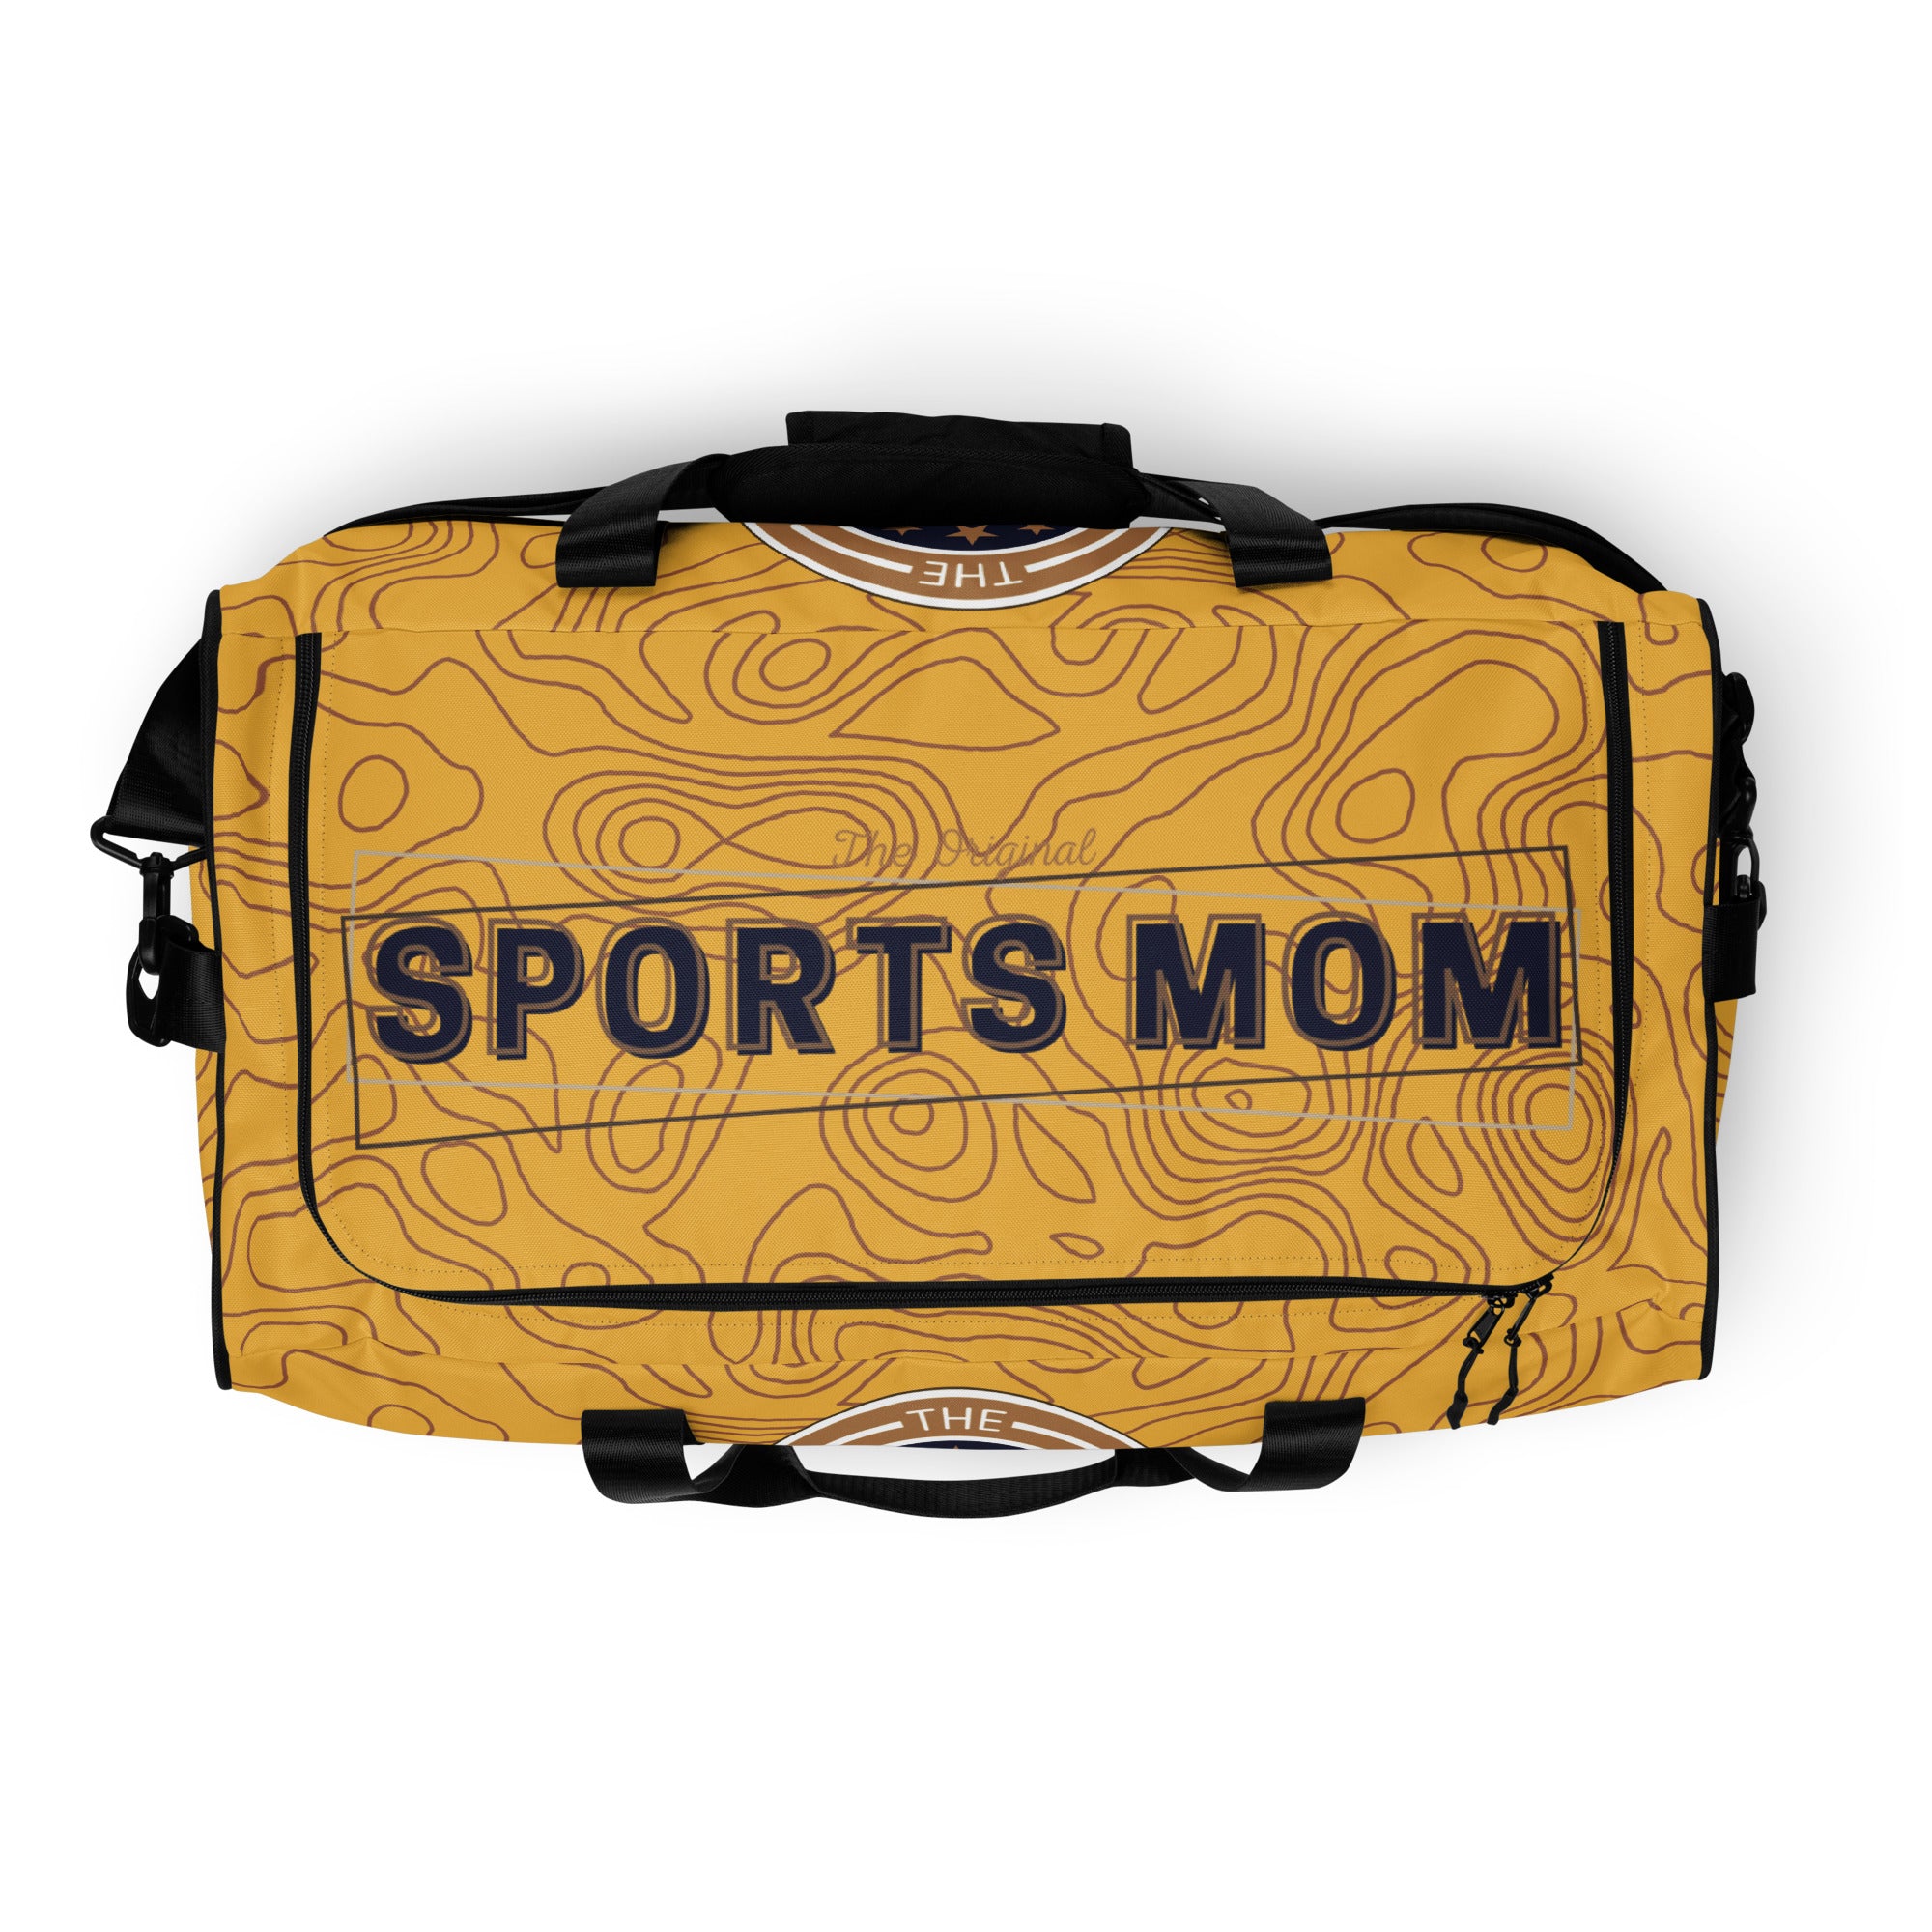 Sports Mom - Away Game - Ultimate Duffle Bag - Abstract Oasis